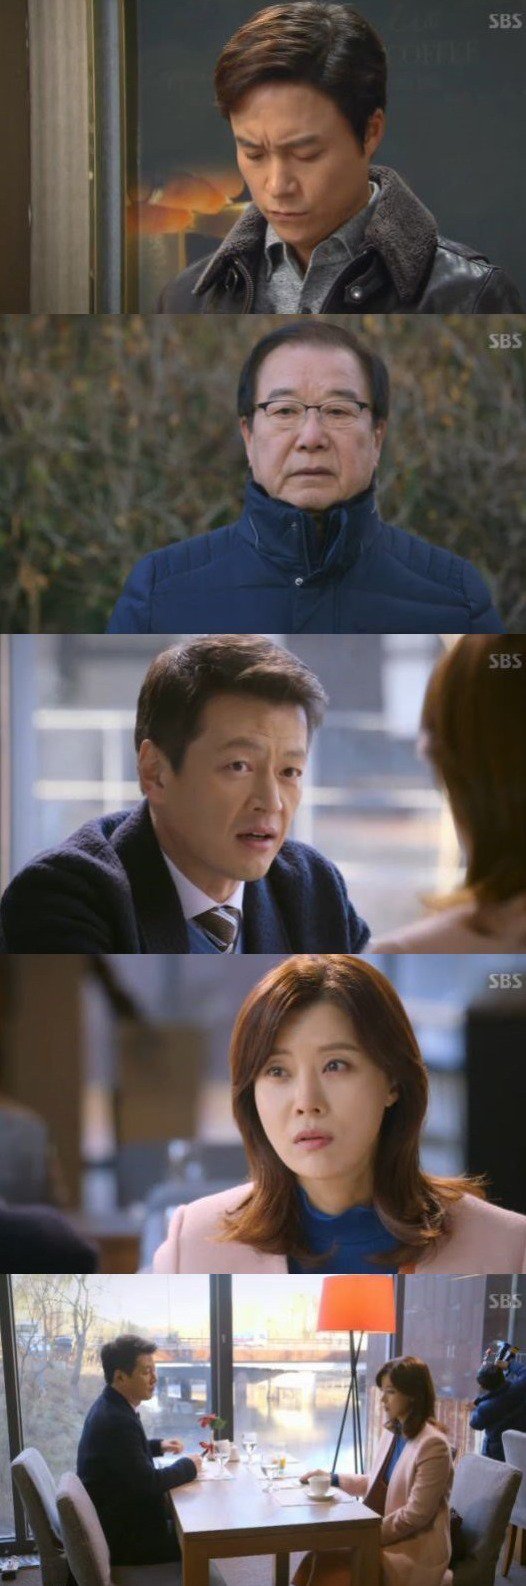 episodes 34 and 35 captures for the Korean drama 'My Gap-soon'